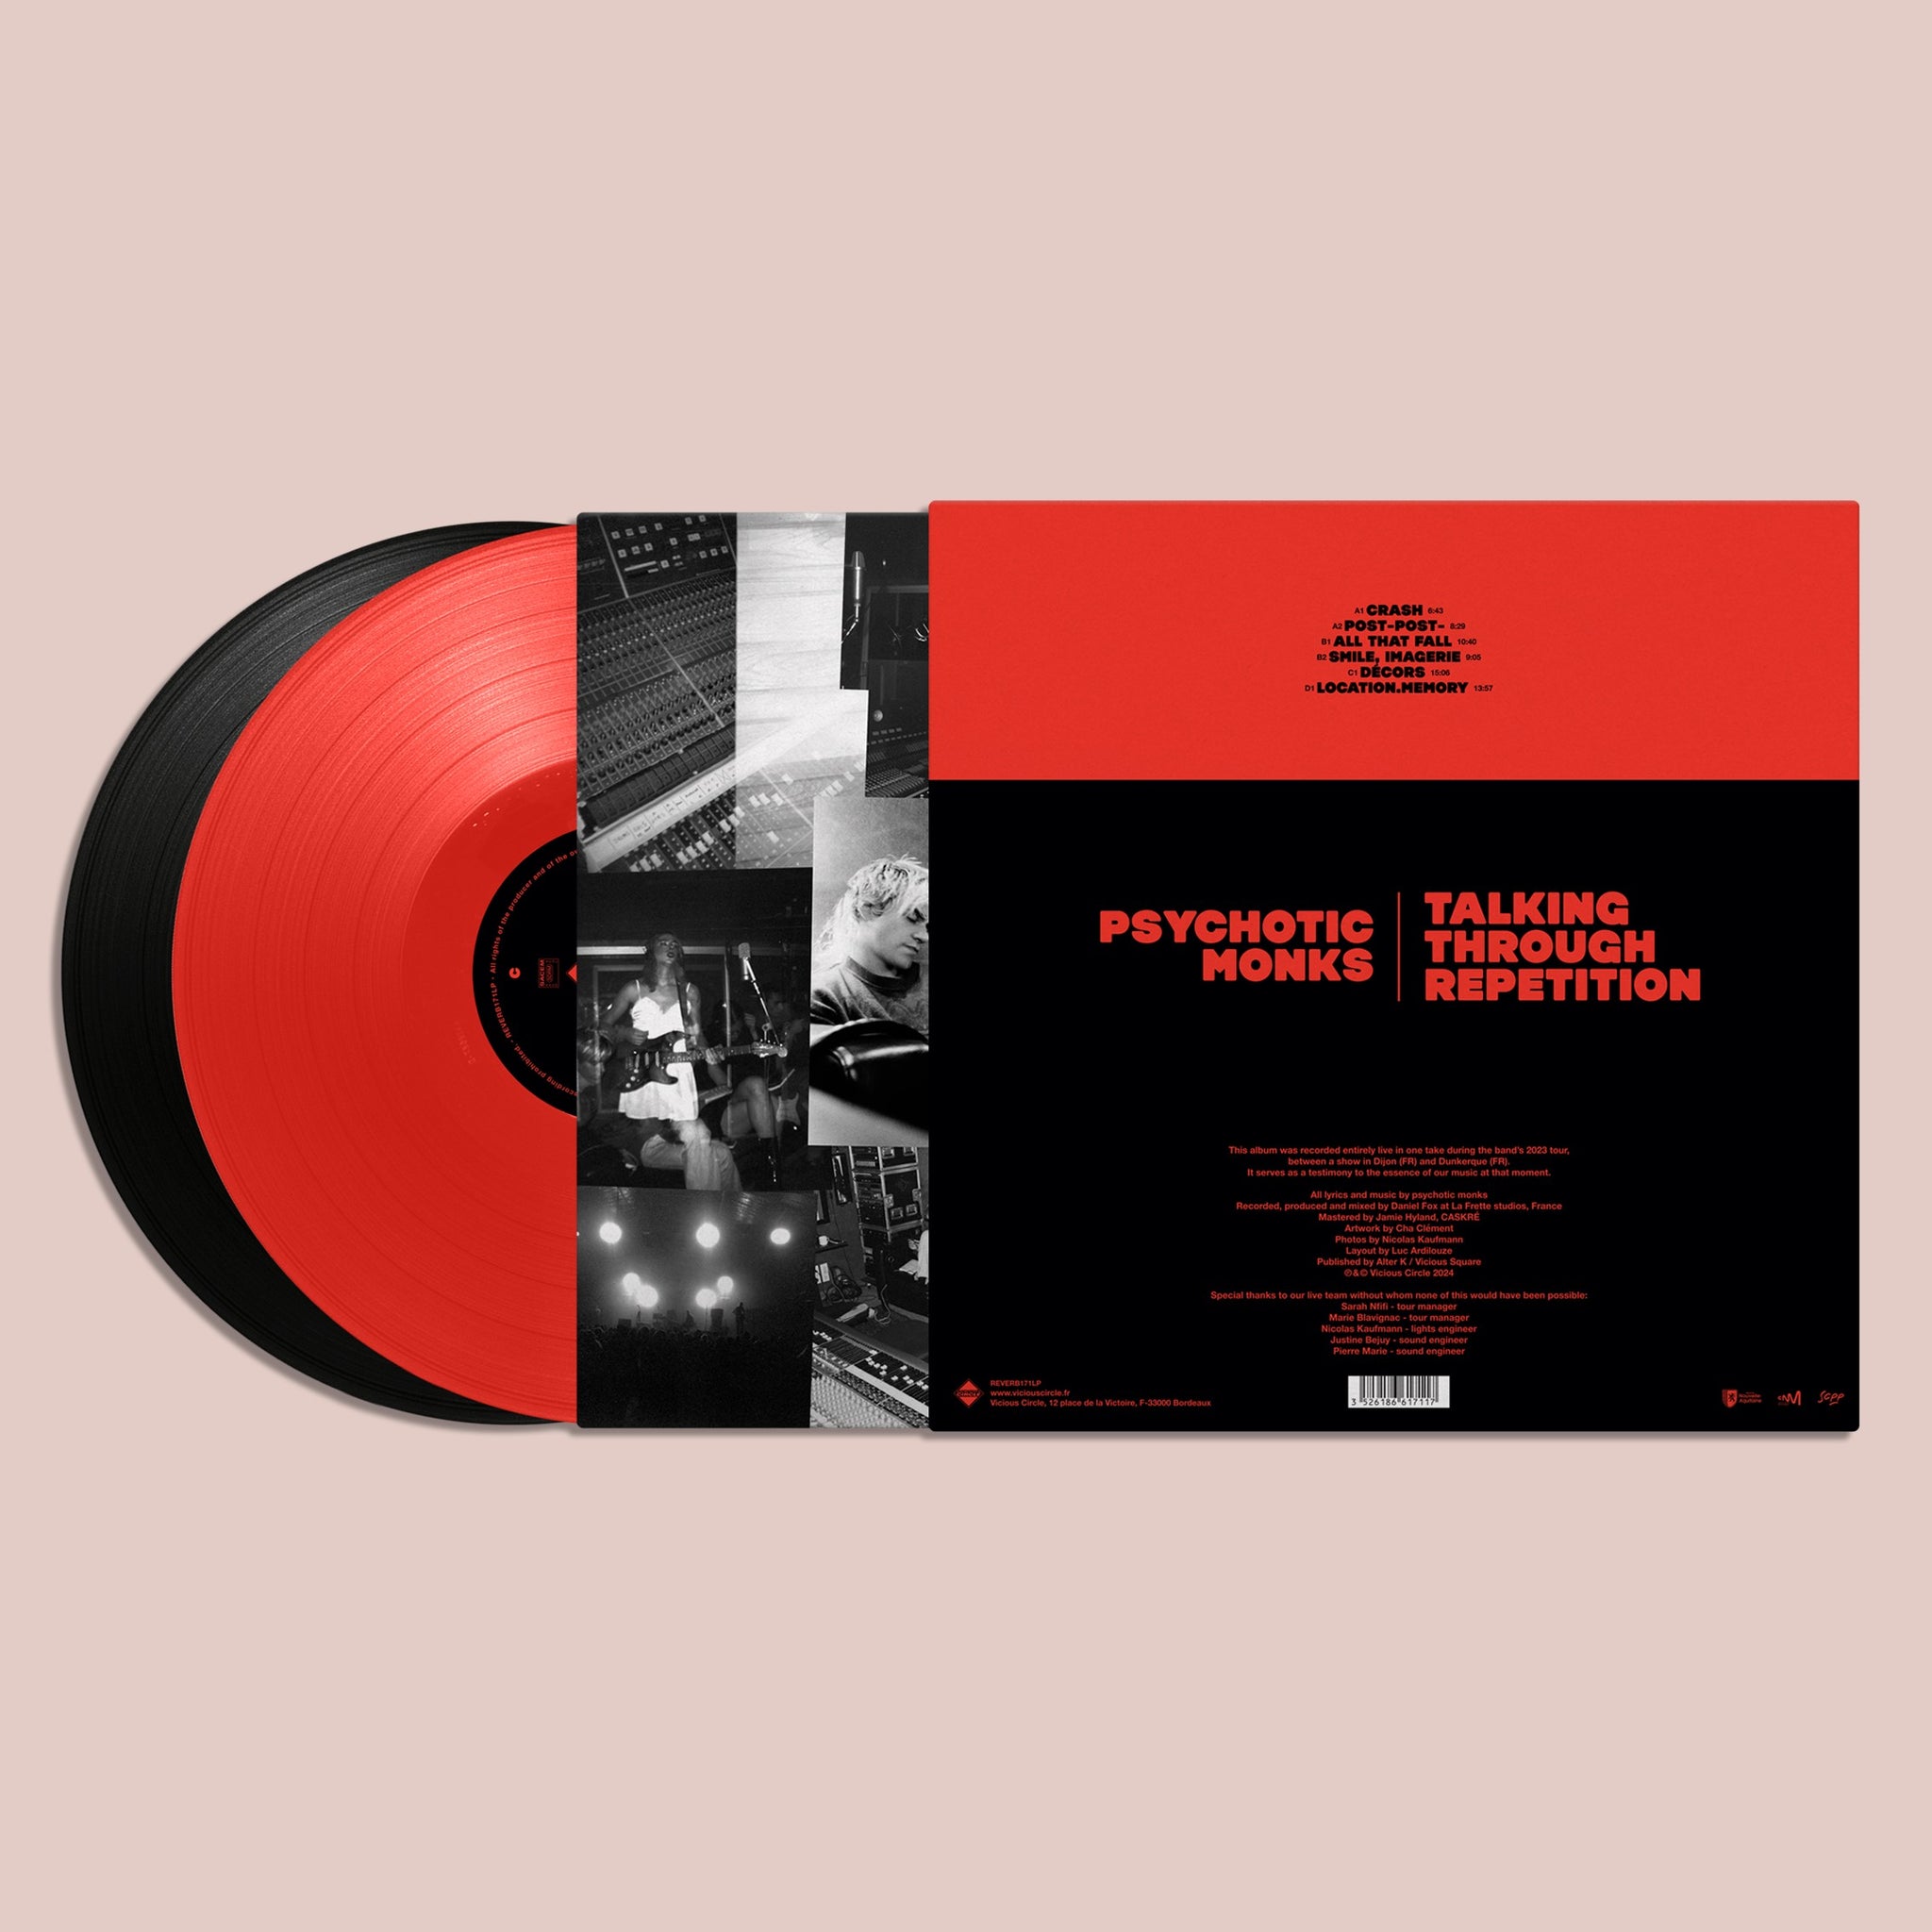 THE PSYCHOTIC MONKS - Talking Through Repetition - 2LP - Red / Black Vinyl [AUG 23]